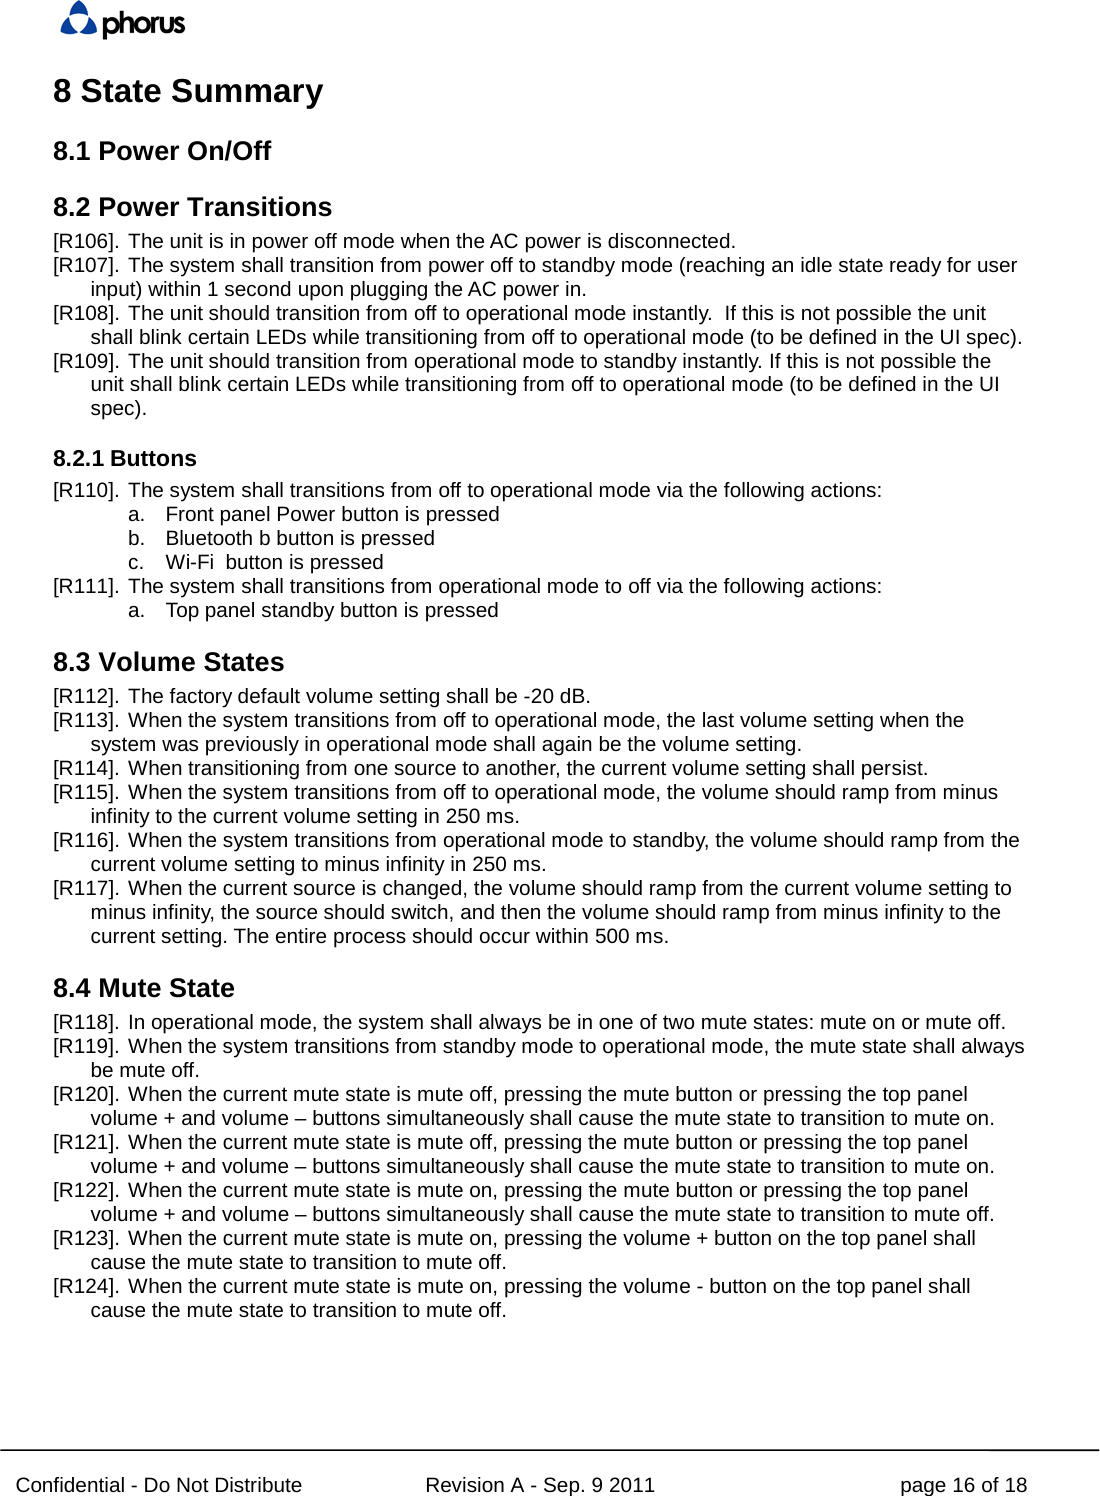  Confidential - Do Not Distribute Revision A - Sep. 9 2011 page 16 of 18 8 State Summary 8.1 Power On/Off 8.2 Power Transitions [R106]. The unit is in power off mode when the AC power is disconnected. [R107]. The system shall transition from power off to standby mode (reaching an idle state ready for user input) within 1 second upon plugging the AC power in. [R108]. The unit should transition from off to operational mode instantly.  If this is not possible the unit shall blink certain LEDs while transitioning from off to operational mode (to be defined in the UI spec). [R109]. The unit should transition from operational mode to standby instantly. If this is not possible the unit shall blink certain LEDs while transitioning from off to operational mode (to be defined in the UI spec). 8.2.1 Buttons [R110]. The system shall transitions from off to operational mode via the following actions: a. Front panel Power button is pressed b. Bluetooth b button is pressed c. Wi-Fi  button is pressed [R111]. The system shall transitions from operational mode to off via the following actions: a. Top panel standby button is pressed 8.3 Volume States [R112]. The factory default volume setting shall be -20 dB. [R113]. When the system transitions from off to operational mode, the last volume setting when the system was previously in operational mode shall again be the volume setting. [R114]. When transitioning from one source to another, the current volume setting shall persist. [R115]. When the system transitions from off to operational mode, the volume should ramp from minus infinity to the current volume setting in 250 ms. [R116]. When the system transitions from operational mode to standby, the volume should ramp from the current volume setting to minus infinity in 250 ms. [R117]. When the current source is changed, the volume should ramp from the current volume setting to minus infinity, the source should switch, and then the volume should ramp from minus infinity to the current setting. The entire process should occur within 500 ms. 8.4 Mute State [R118]. In operational mode, the system shall always be in one of two mute states: mute on or mute off. [R119]. When the system transitions from standby mode to operational mode, the mute state shall always be mute off. [R120]. When the current mute state is mute off, pressing the mute button or pressing the top panel volume + and volume – buttons simultaneously shall cause the mute state to transition to mute on. [R121]. When the current mute state is mute off, pressing the mute button or pressing the top panel volume + and volume – buttons simultaneously shall cause the mute state to transition to mute on. [R122]. When the current mute state is mute on, pressing the mute button or pressing the top panel volume + and volume – buttons simultaneously shall cause the mute state to transition to mute off. [R123]. When the current mute state is mute on, pressing the volume + button on the top panel shall cause the mute state to transition to mute off. [R124]. When the current mute state is mute on, pressing the volume - button on the top panel shall cause the mute state to transition to mute off. 